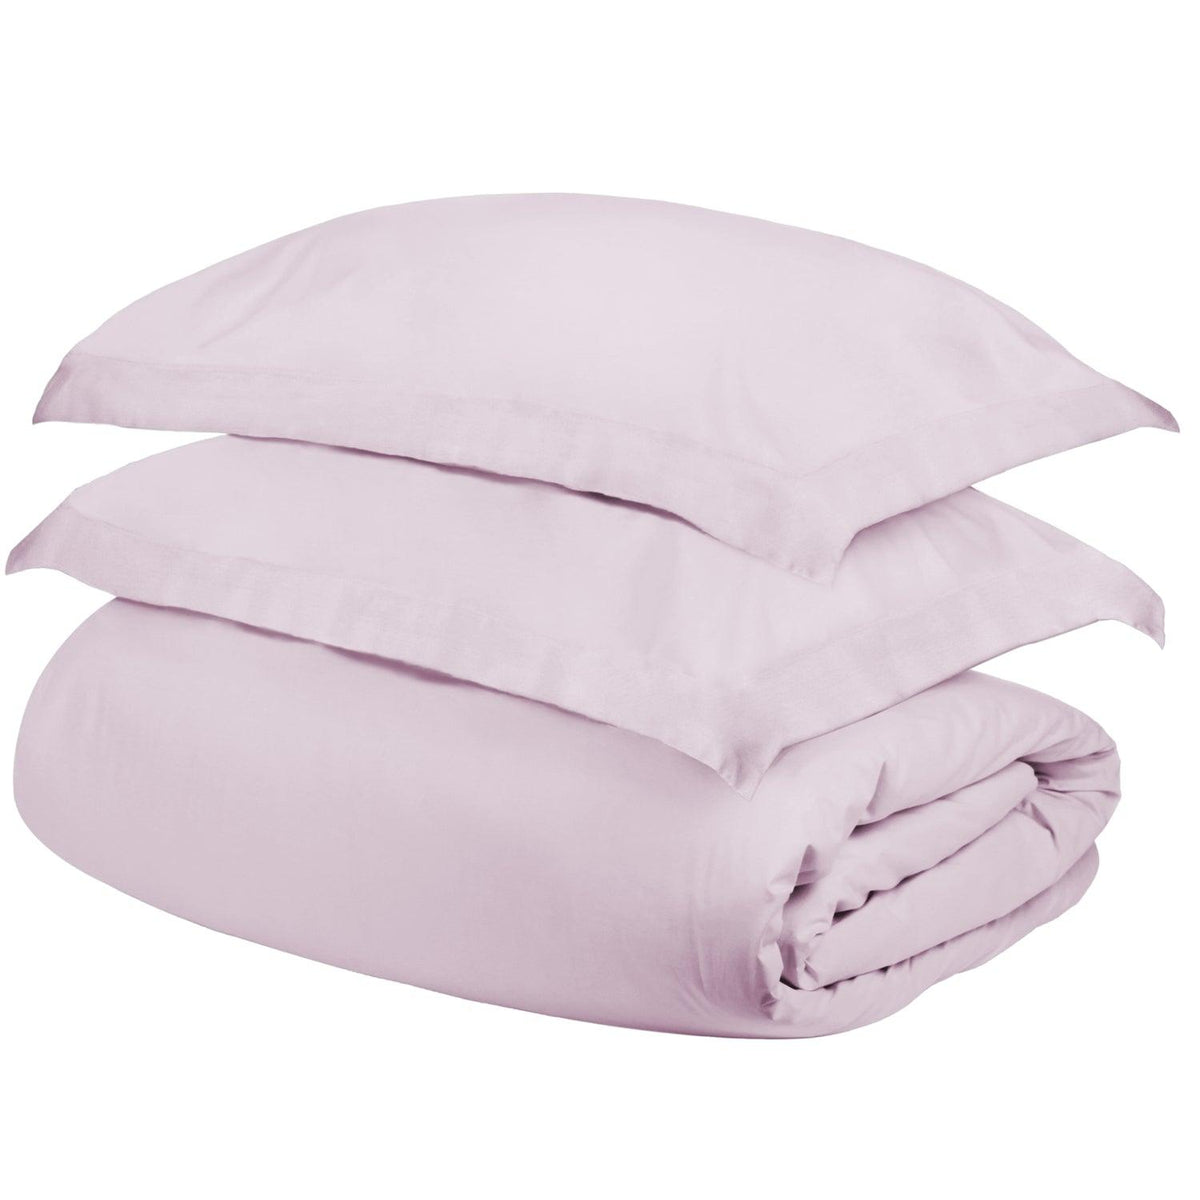  Superior Egyptian Cotton 400 Thread Count Solid Duvet Cover Set - Lilac